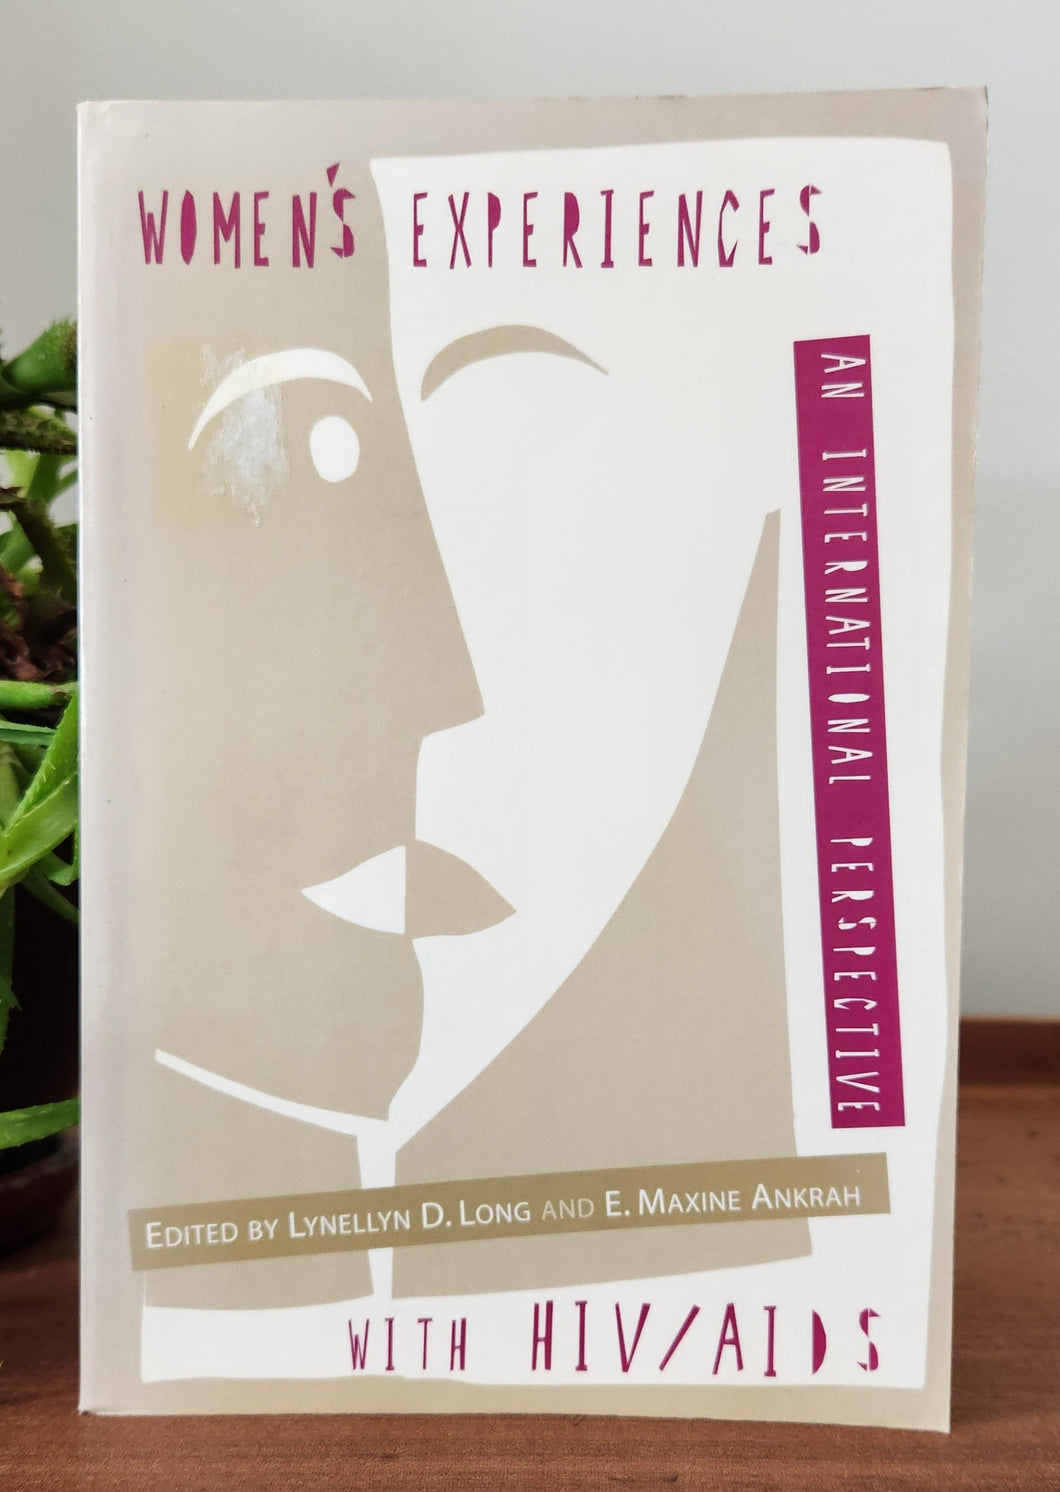 Women's Experiences with HIV / AIDS Edited by Lynellyn D. Long, E. Maxine Ankrah